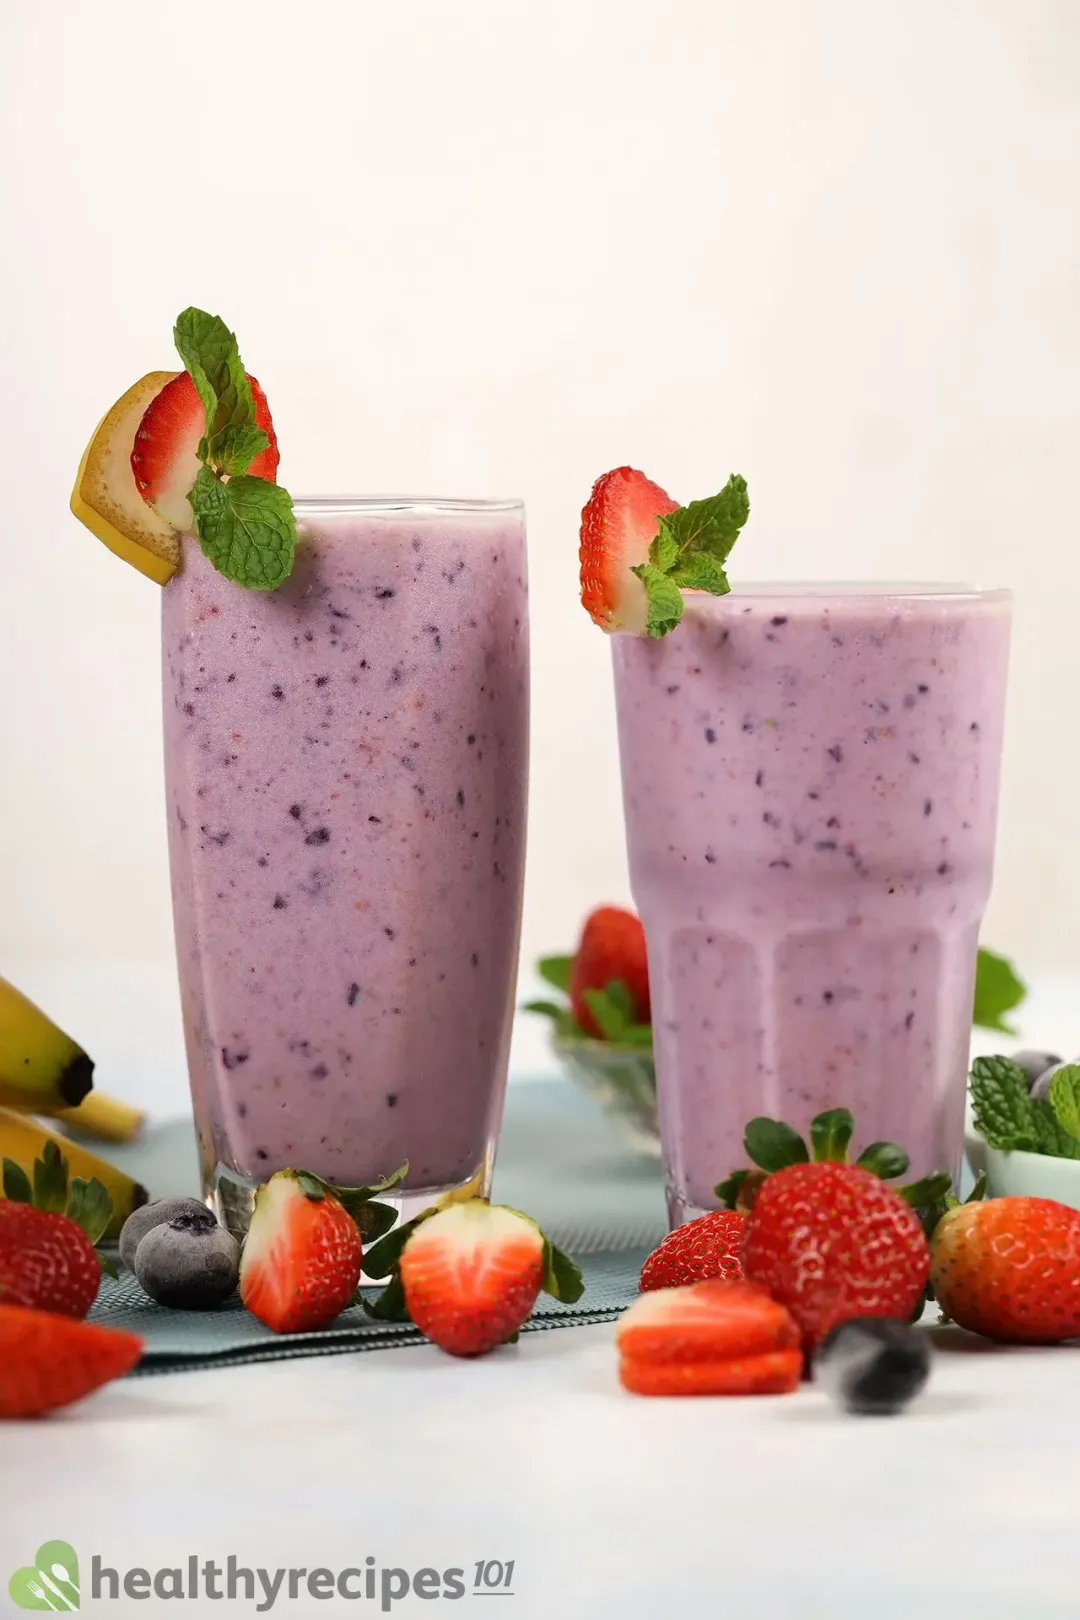 How Long Does This Berry Banana Smoothie Last